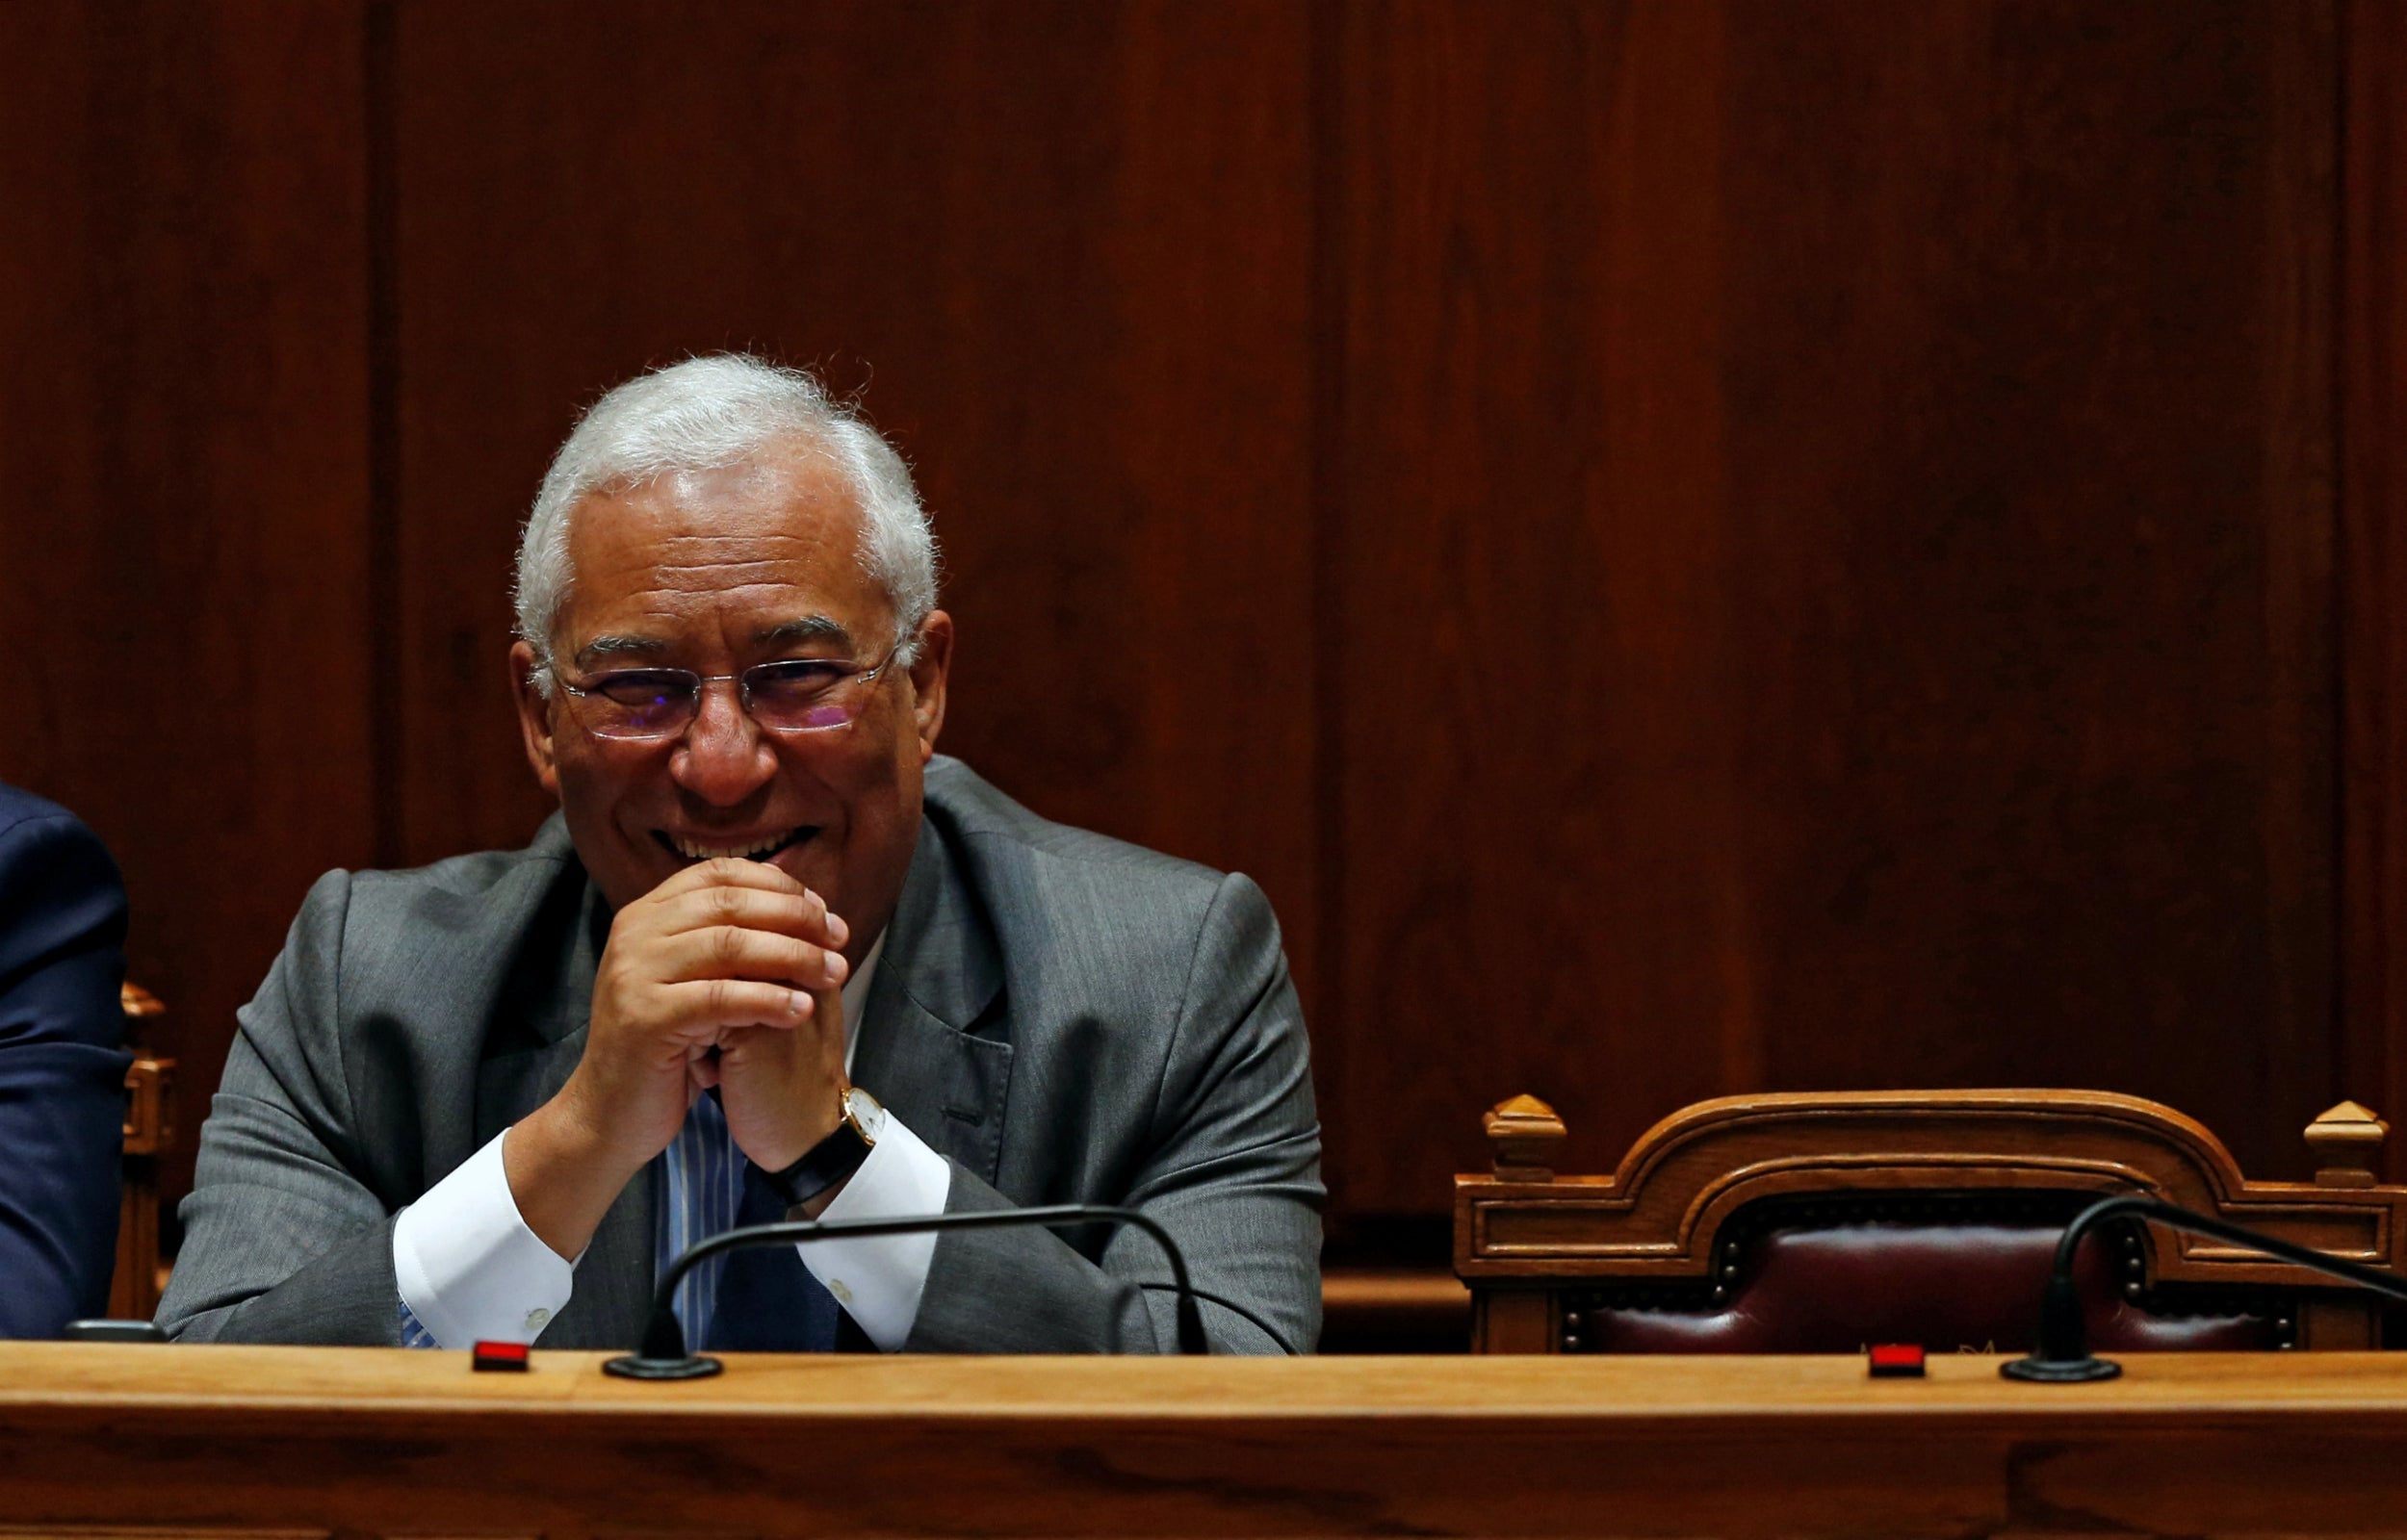 Portugal's prime minister Antonio Costa during a debate at the parliament in Lisbon